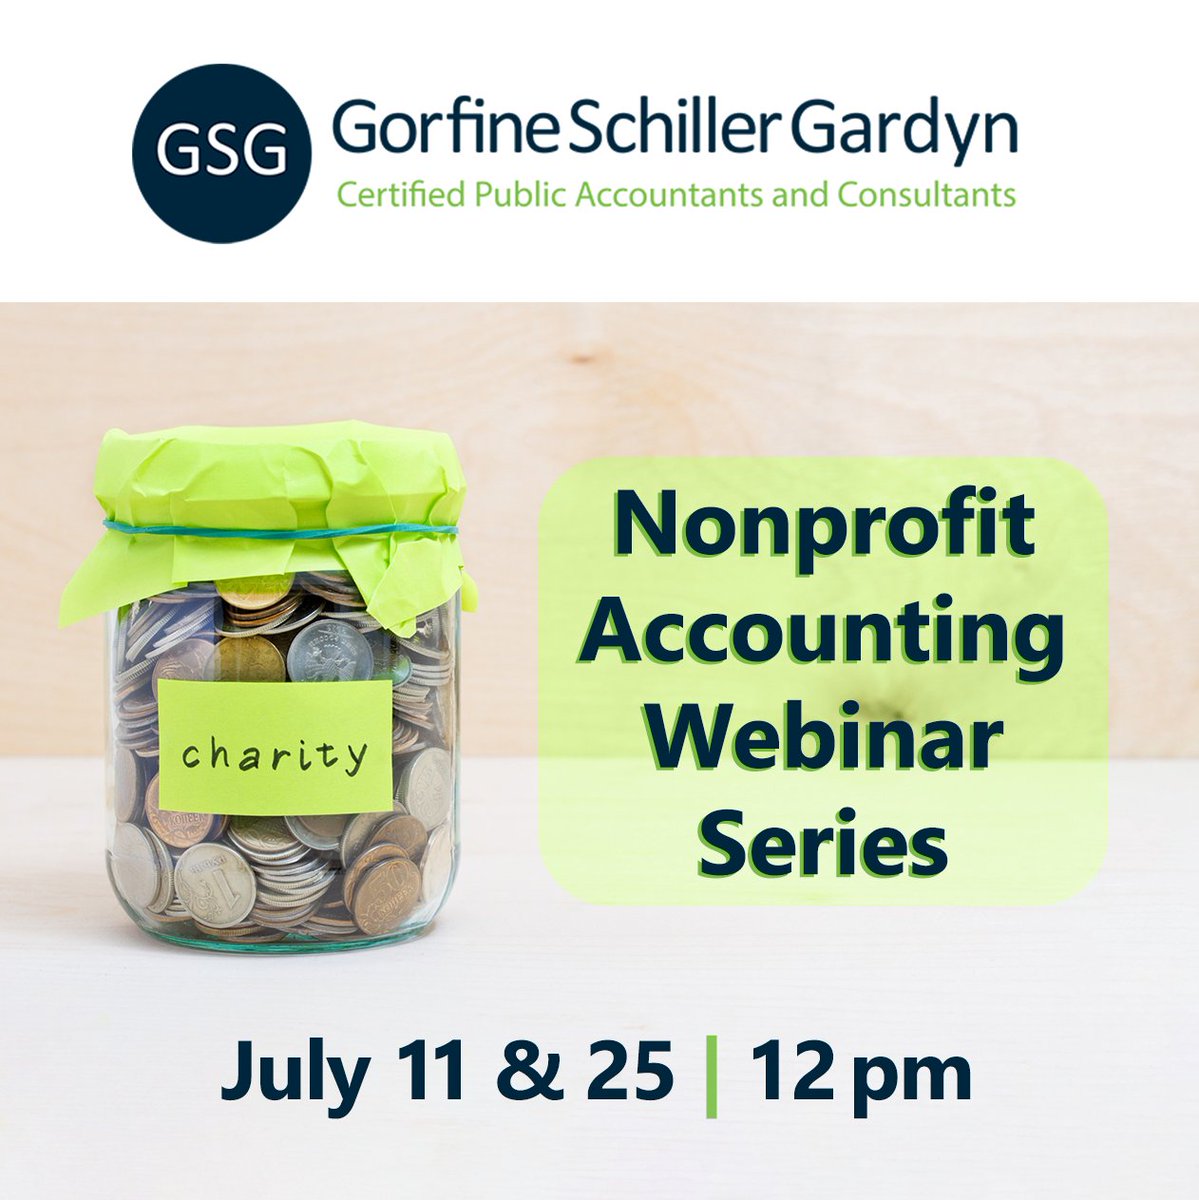 📣 Exciting Announcement! 🎉 Lyceum Insurance Services is proud to share a valuable opportunity with our nonprofit community.
Recording of Pt 1: gsg-cpa.com/nonprofit-acco… 
Registration Pt 2:gsg-cpa.com/webinar-nonpro…

 #NonprofitAccounting #FinancialManagement #Webinar #Collaboration